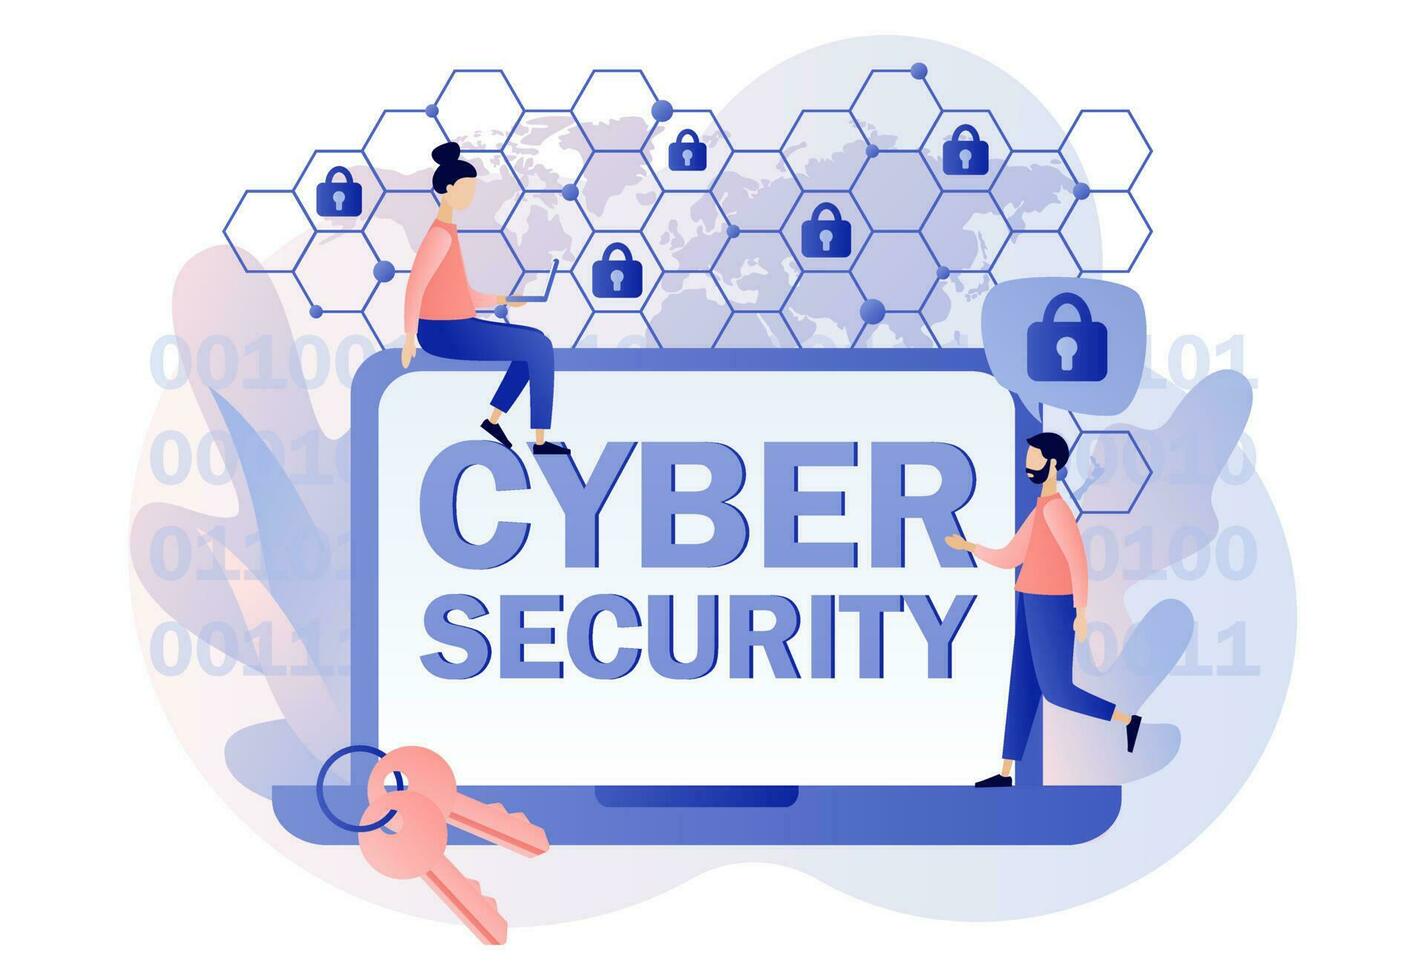 Cyber security - text on laptop screen. Global network security. Data protection. Tiny people protection of computer services and electronic information. Modern flat cartoon style. Vector illustration